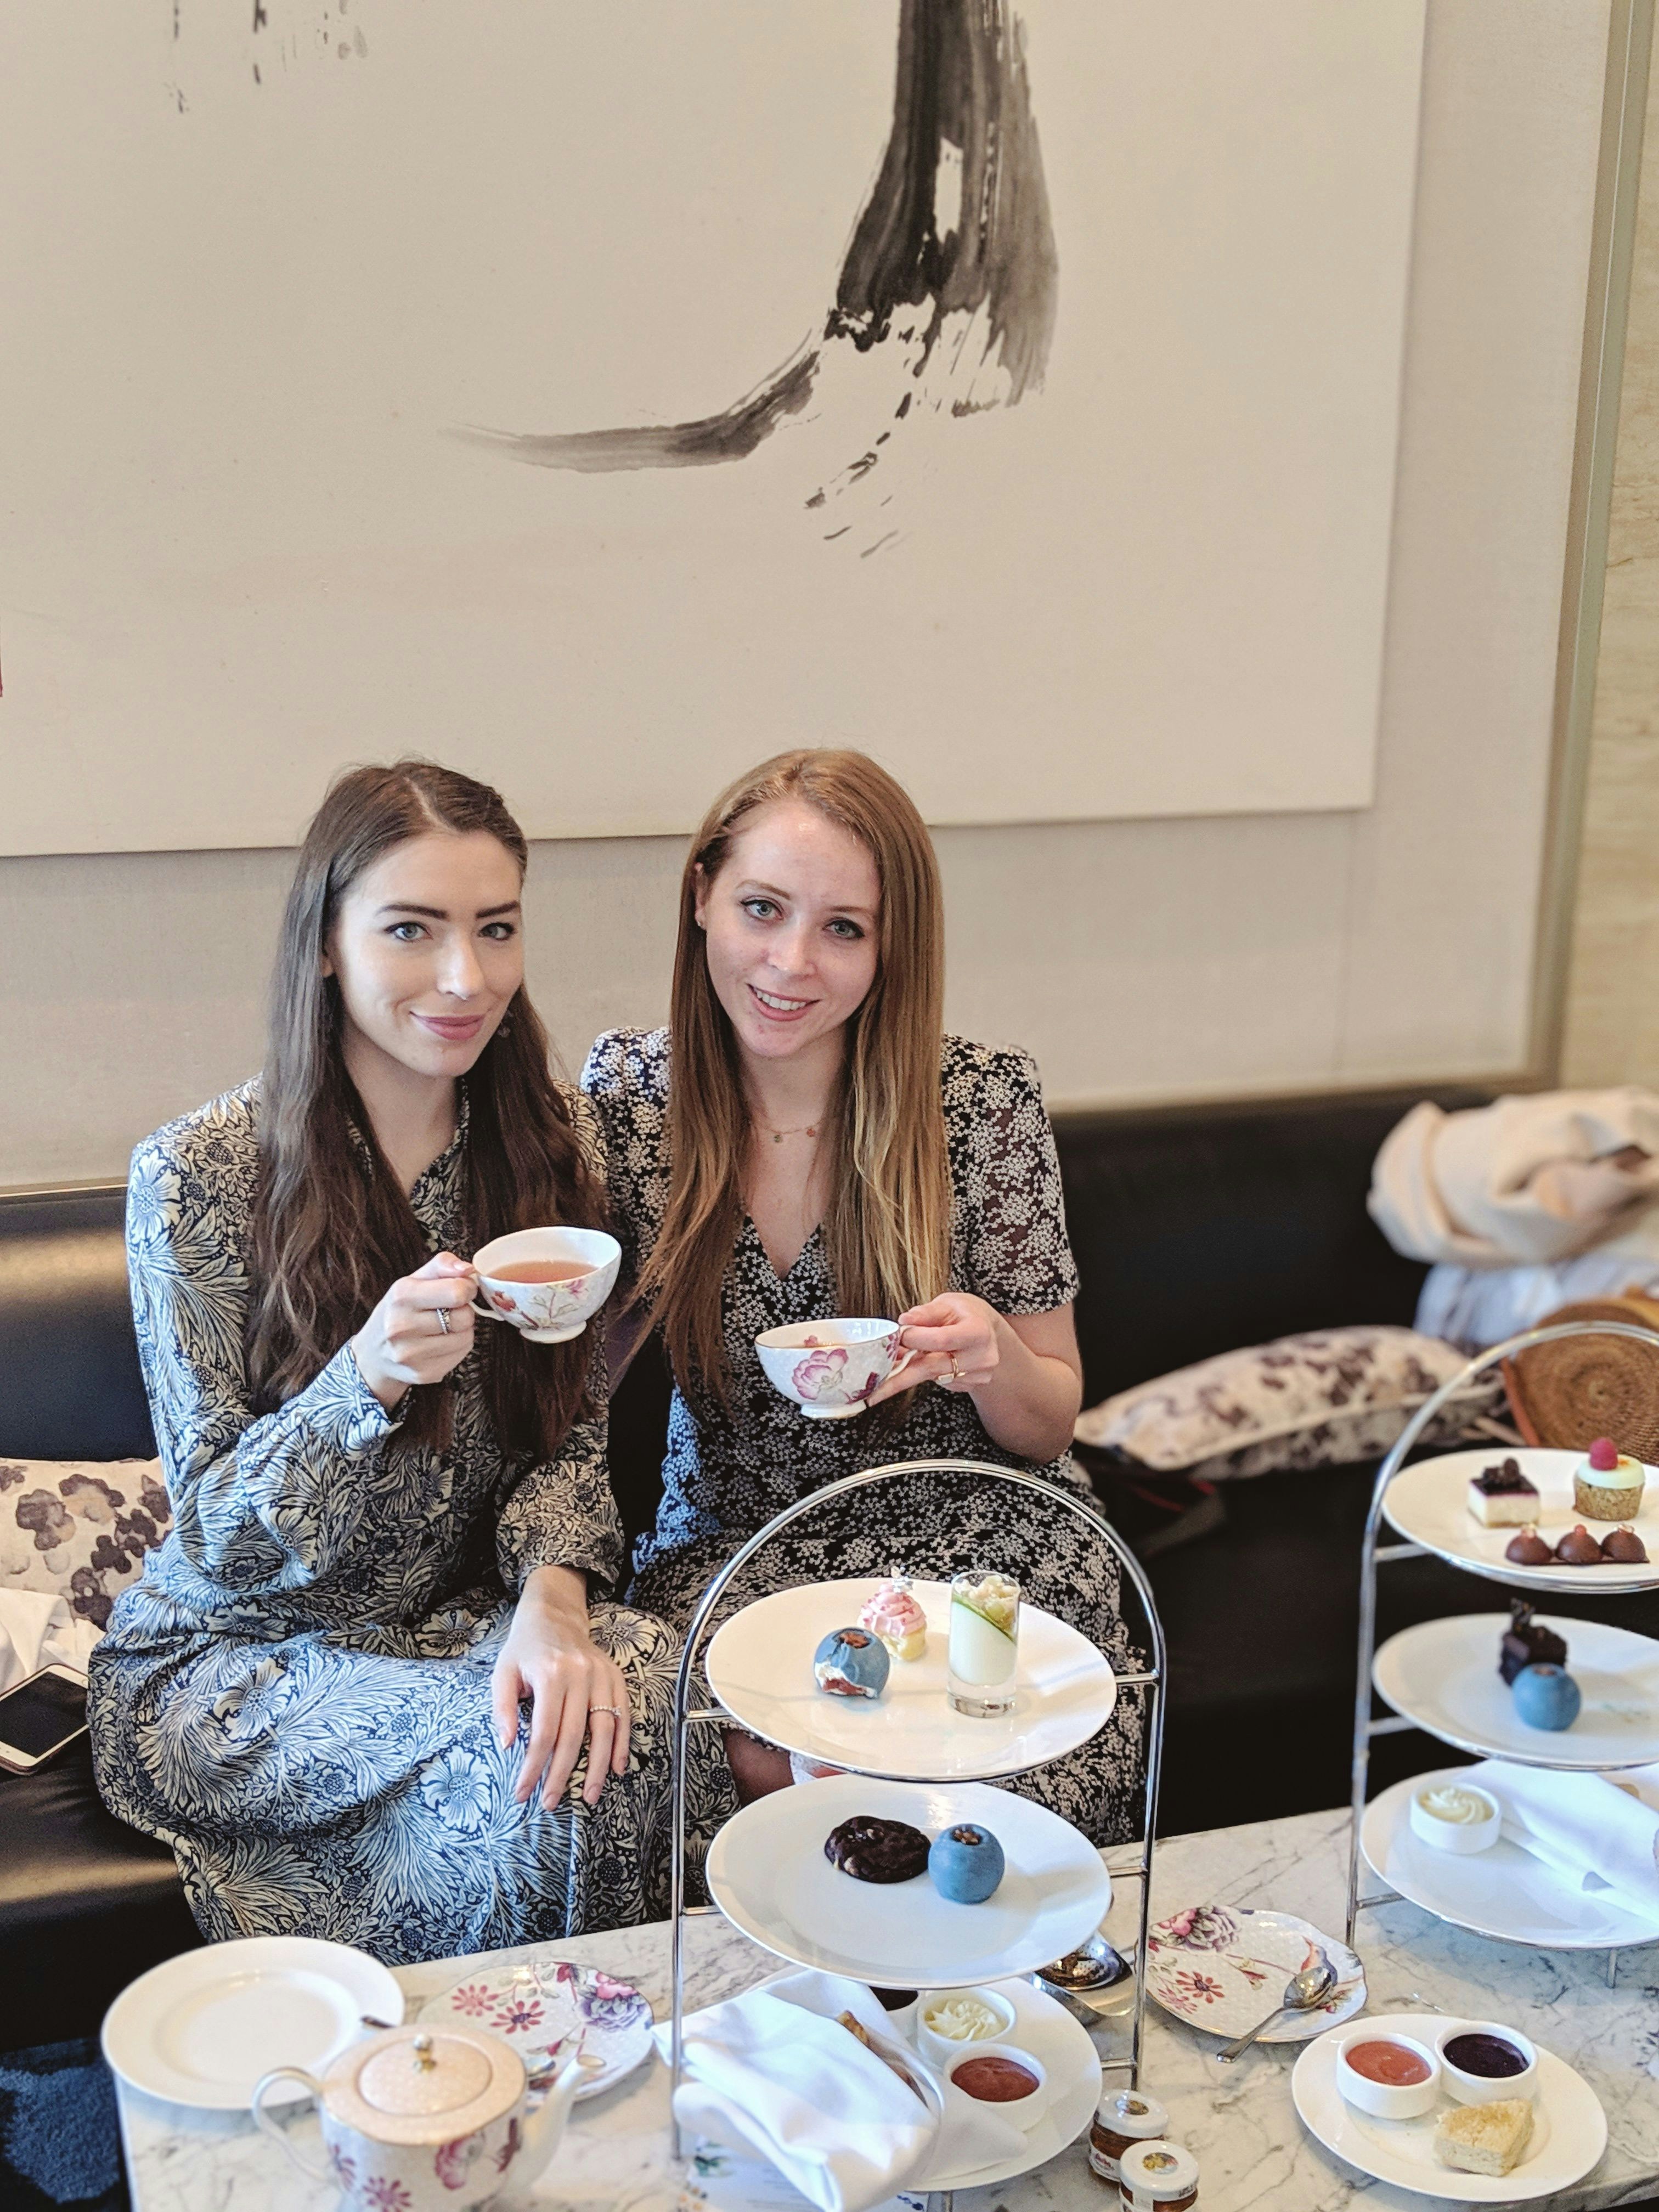 The perfect girls' weekend: high tea at the Shangri-La Hotel in Toronto.